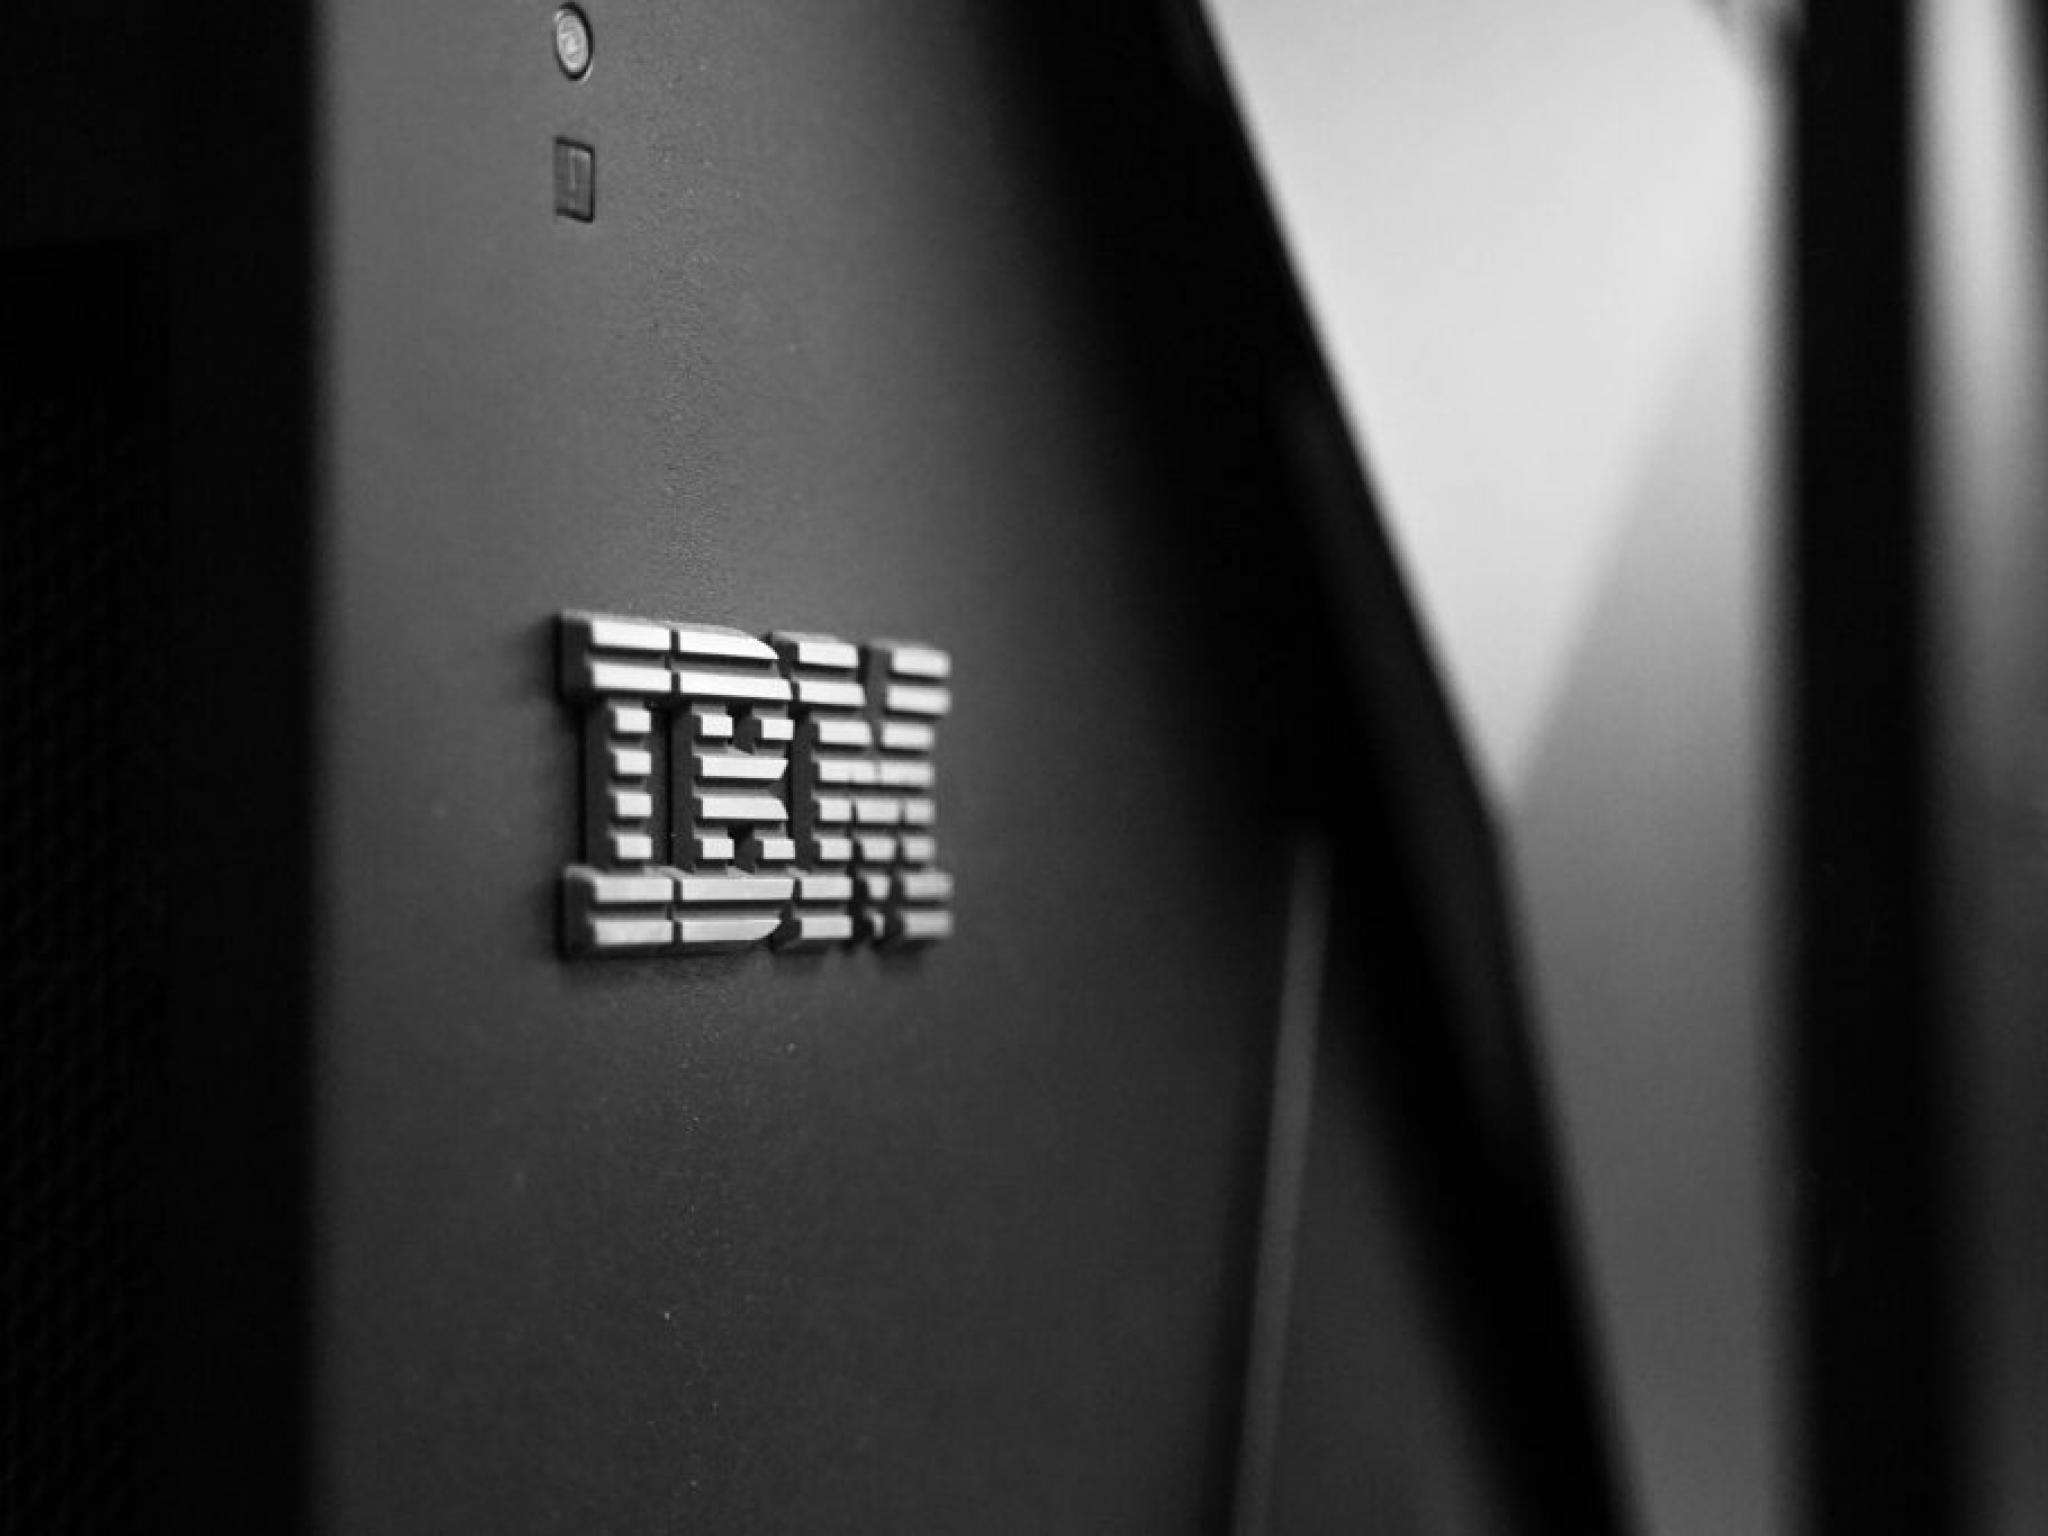  whats-going-on-with-ibm-shares-on-tuesday 